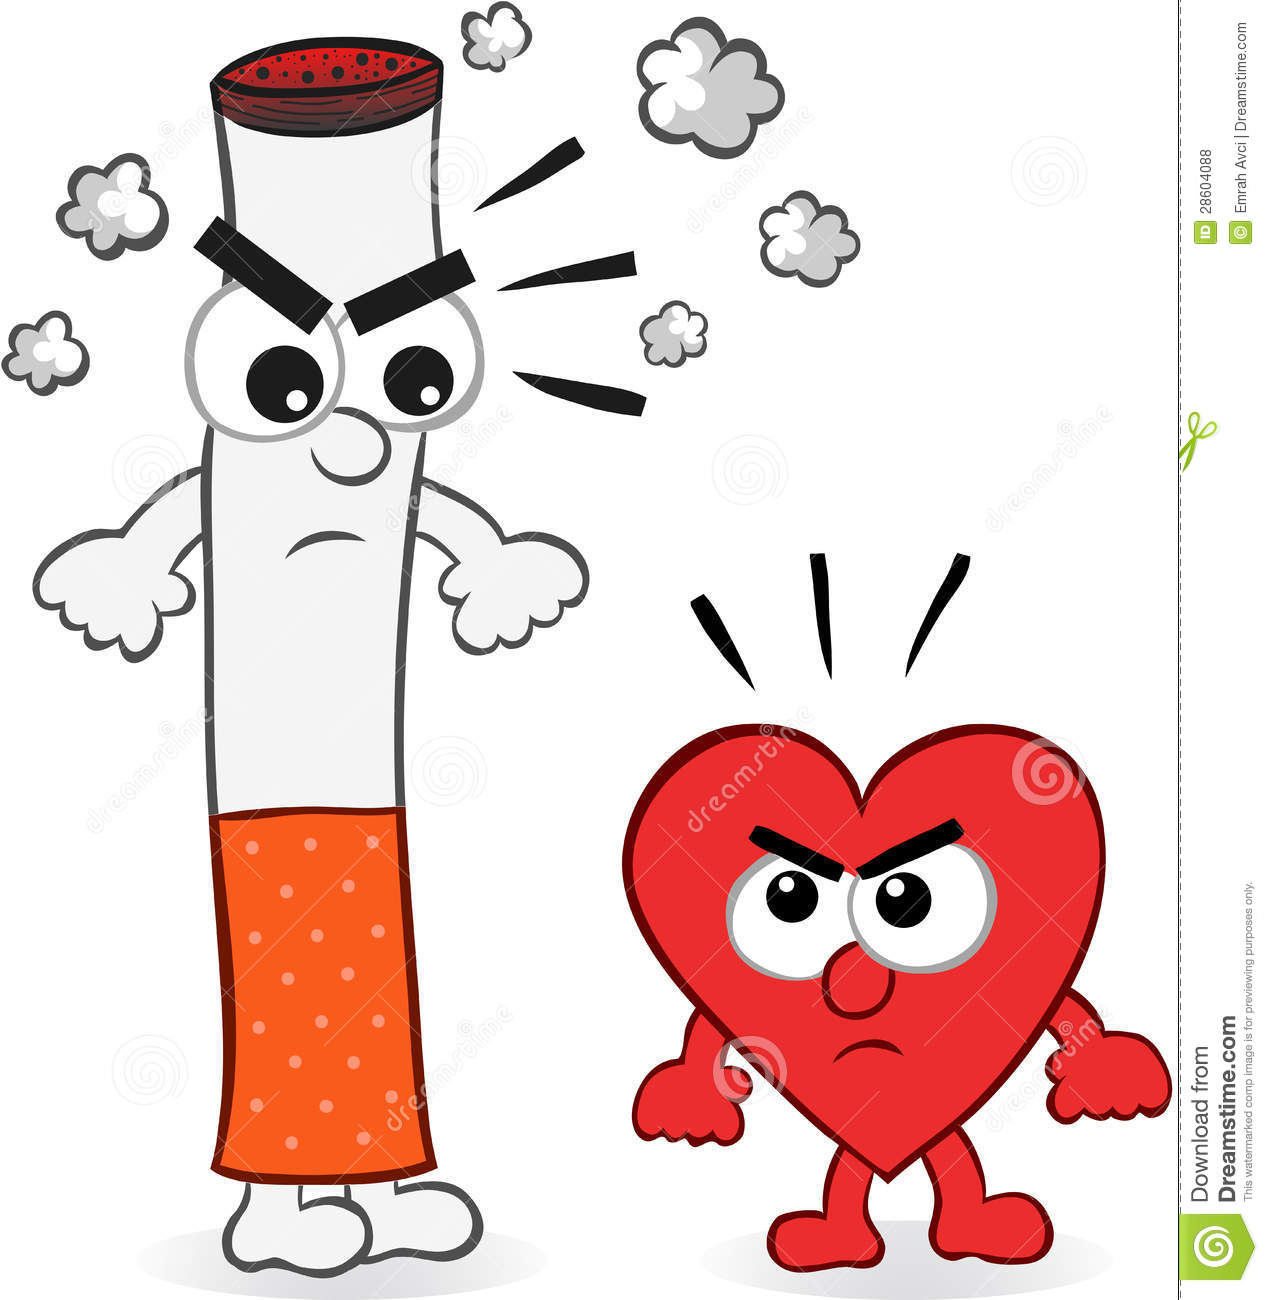 Cigarette And Heart Cartoon Royalty Free Stock Photos   Image